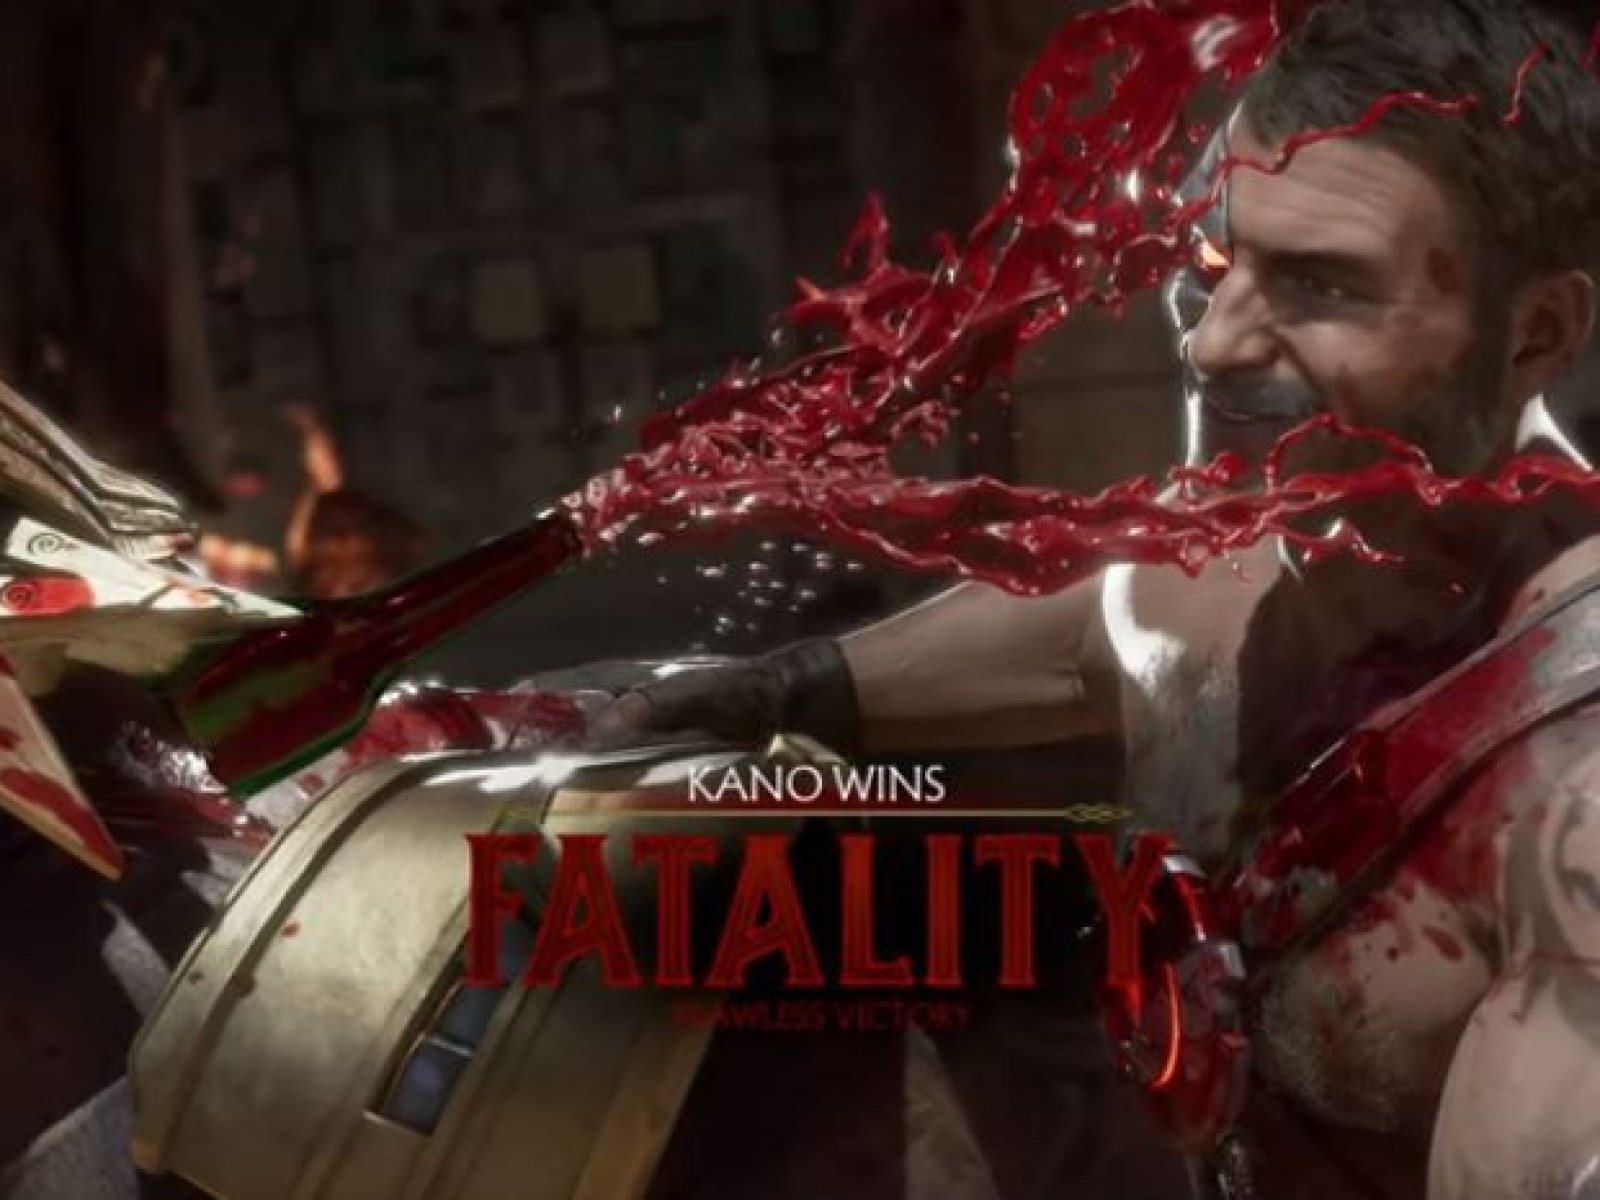 Mortal Kombat 11: How to Perform All of the Fatalities for Every